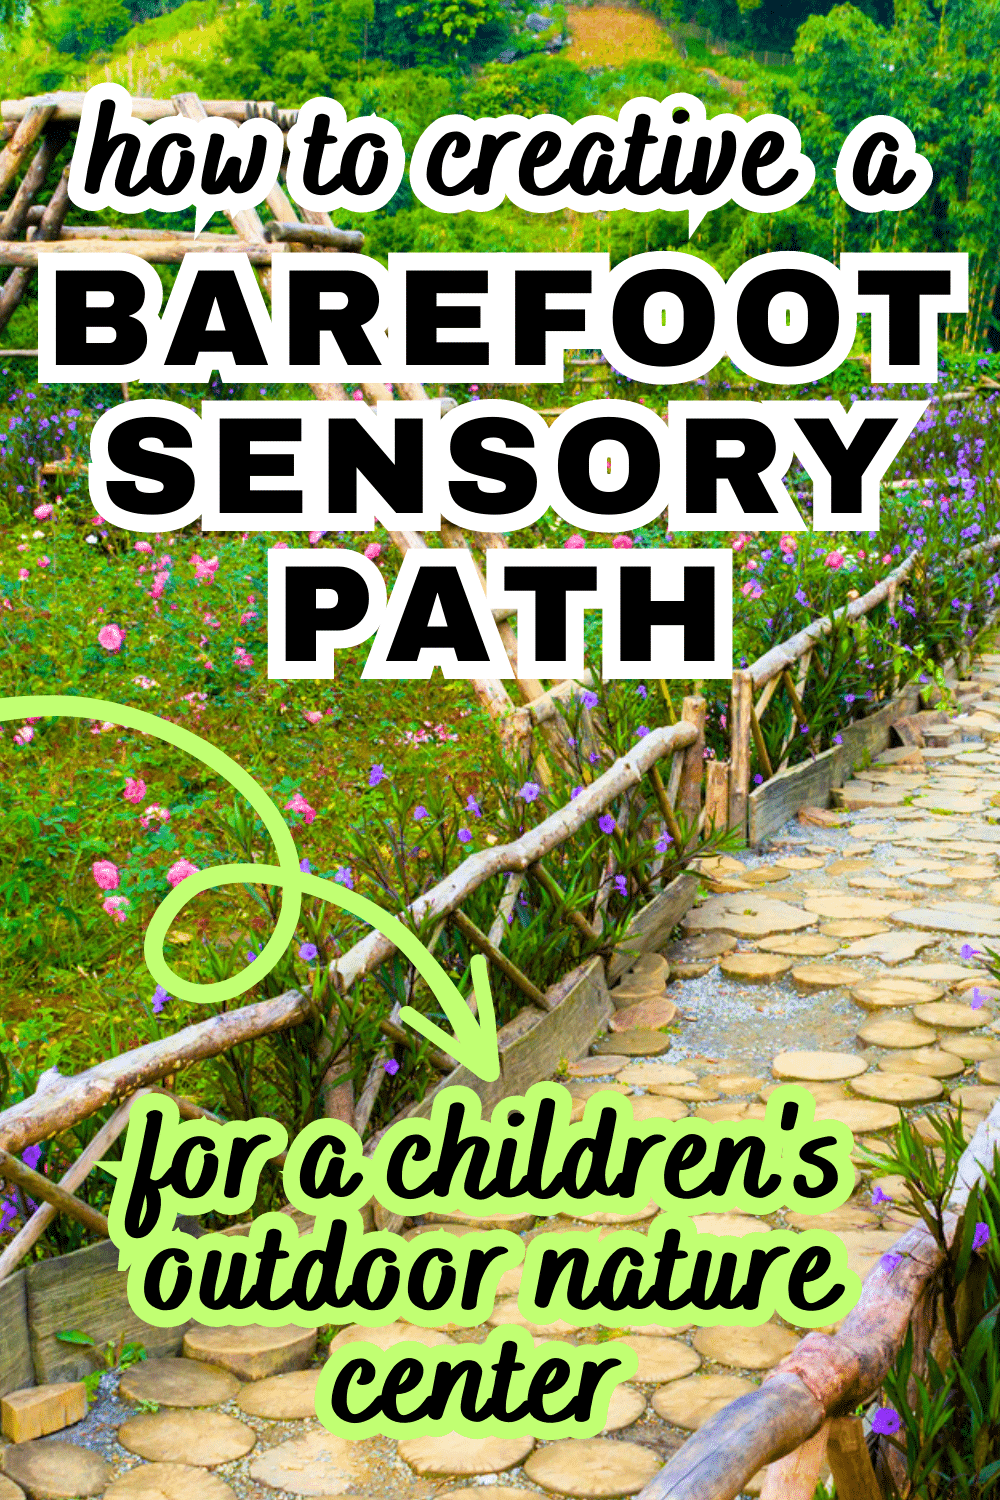 Barefoot Sensory Path For Kids Nature Classroom (Outdoor Nature Center Activities) text over image of a sensory path made of wood circles with flowers around them